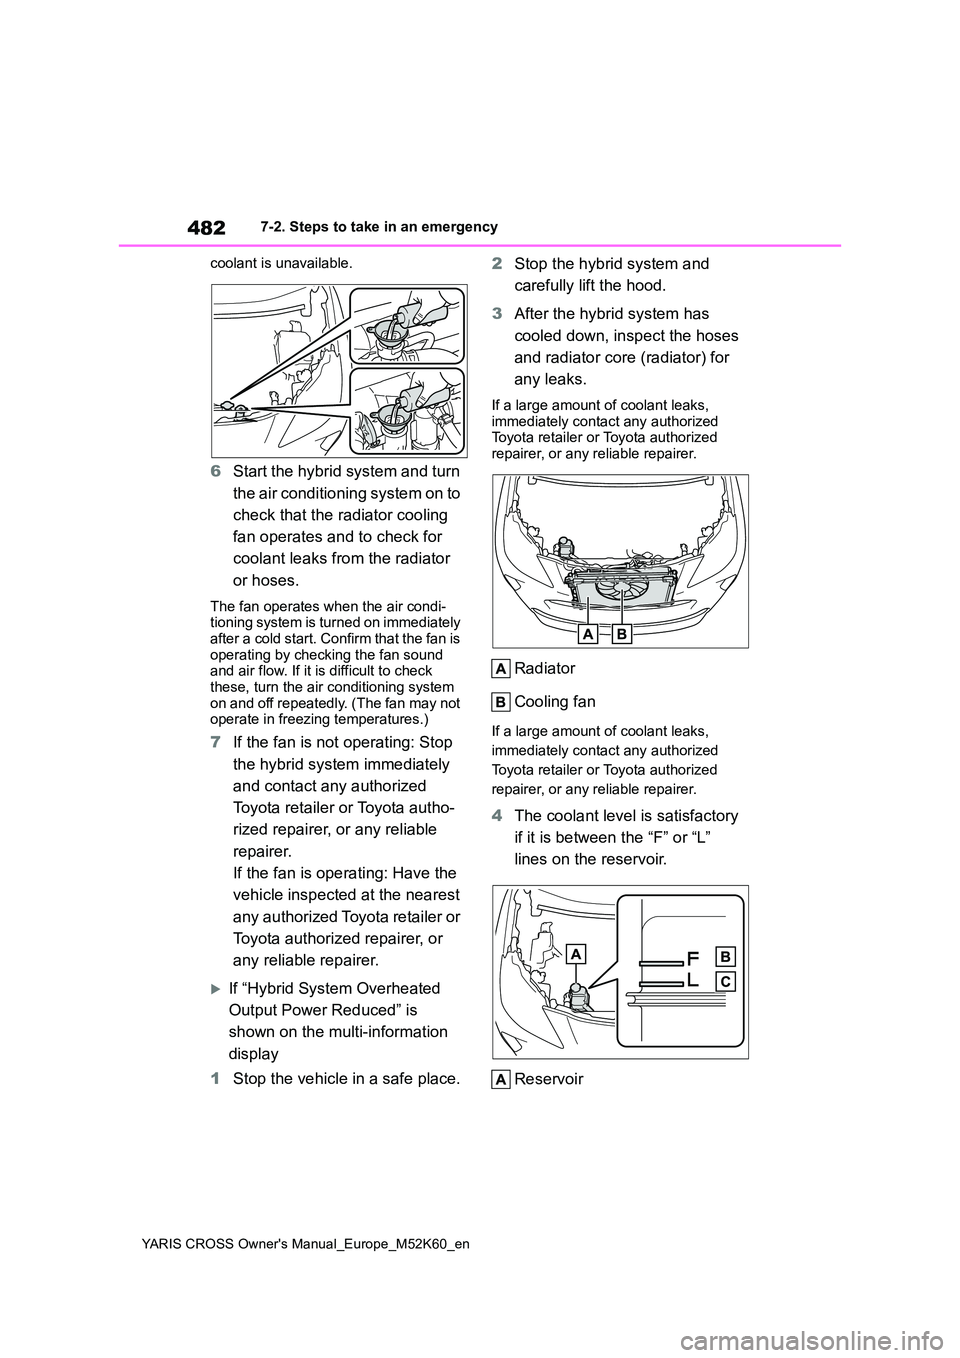 TOYOTA YARIS CROSS 2021  Owners Manual 482
YARIS CROSS Owner's Manual_Europe_M52K60_en
7-2. Steps to take in an emergency 
coolant is unavailable.
6 Start the hybrid system and turn  
the air conditioning system on to  
check that the 